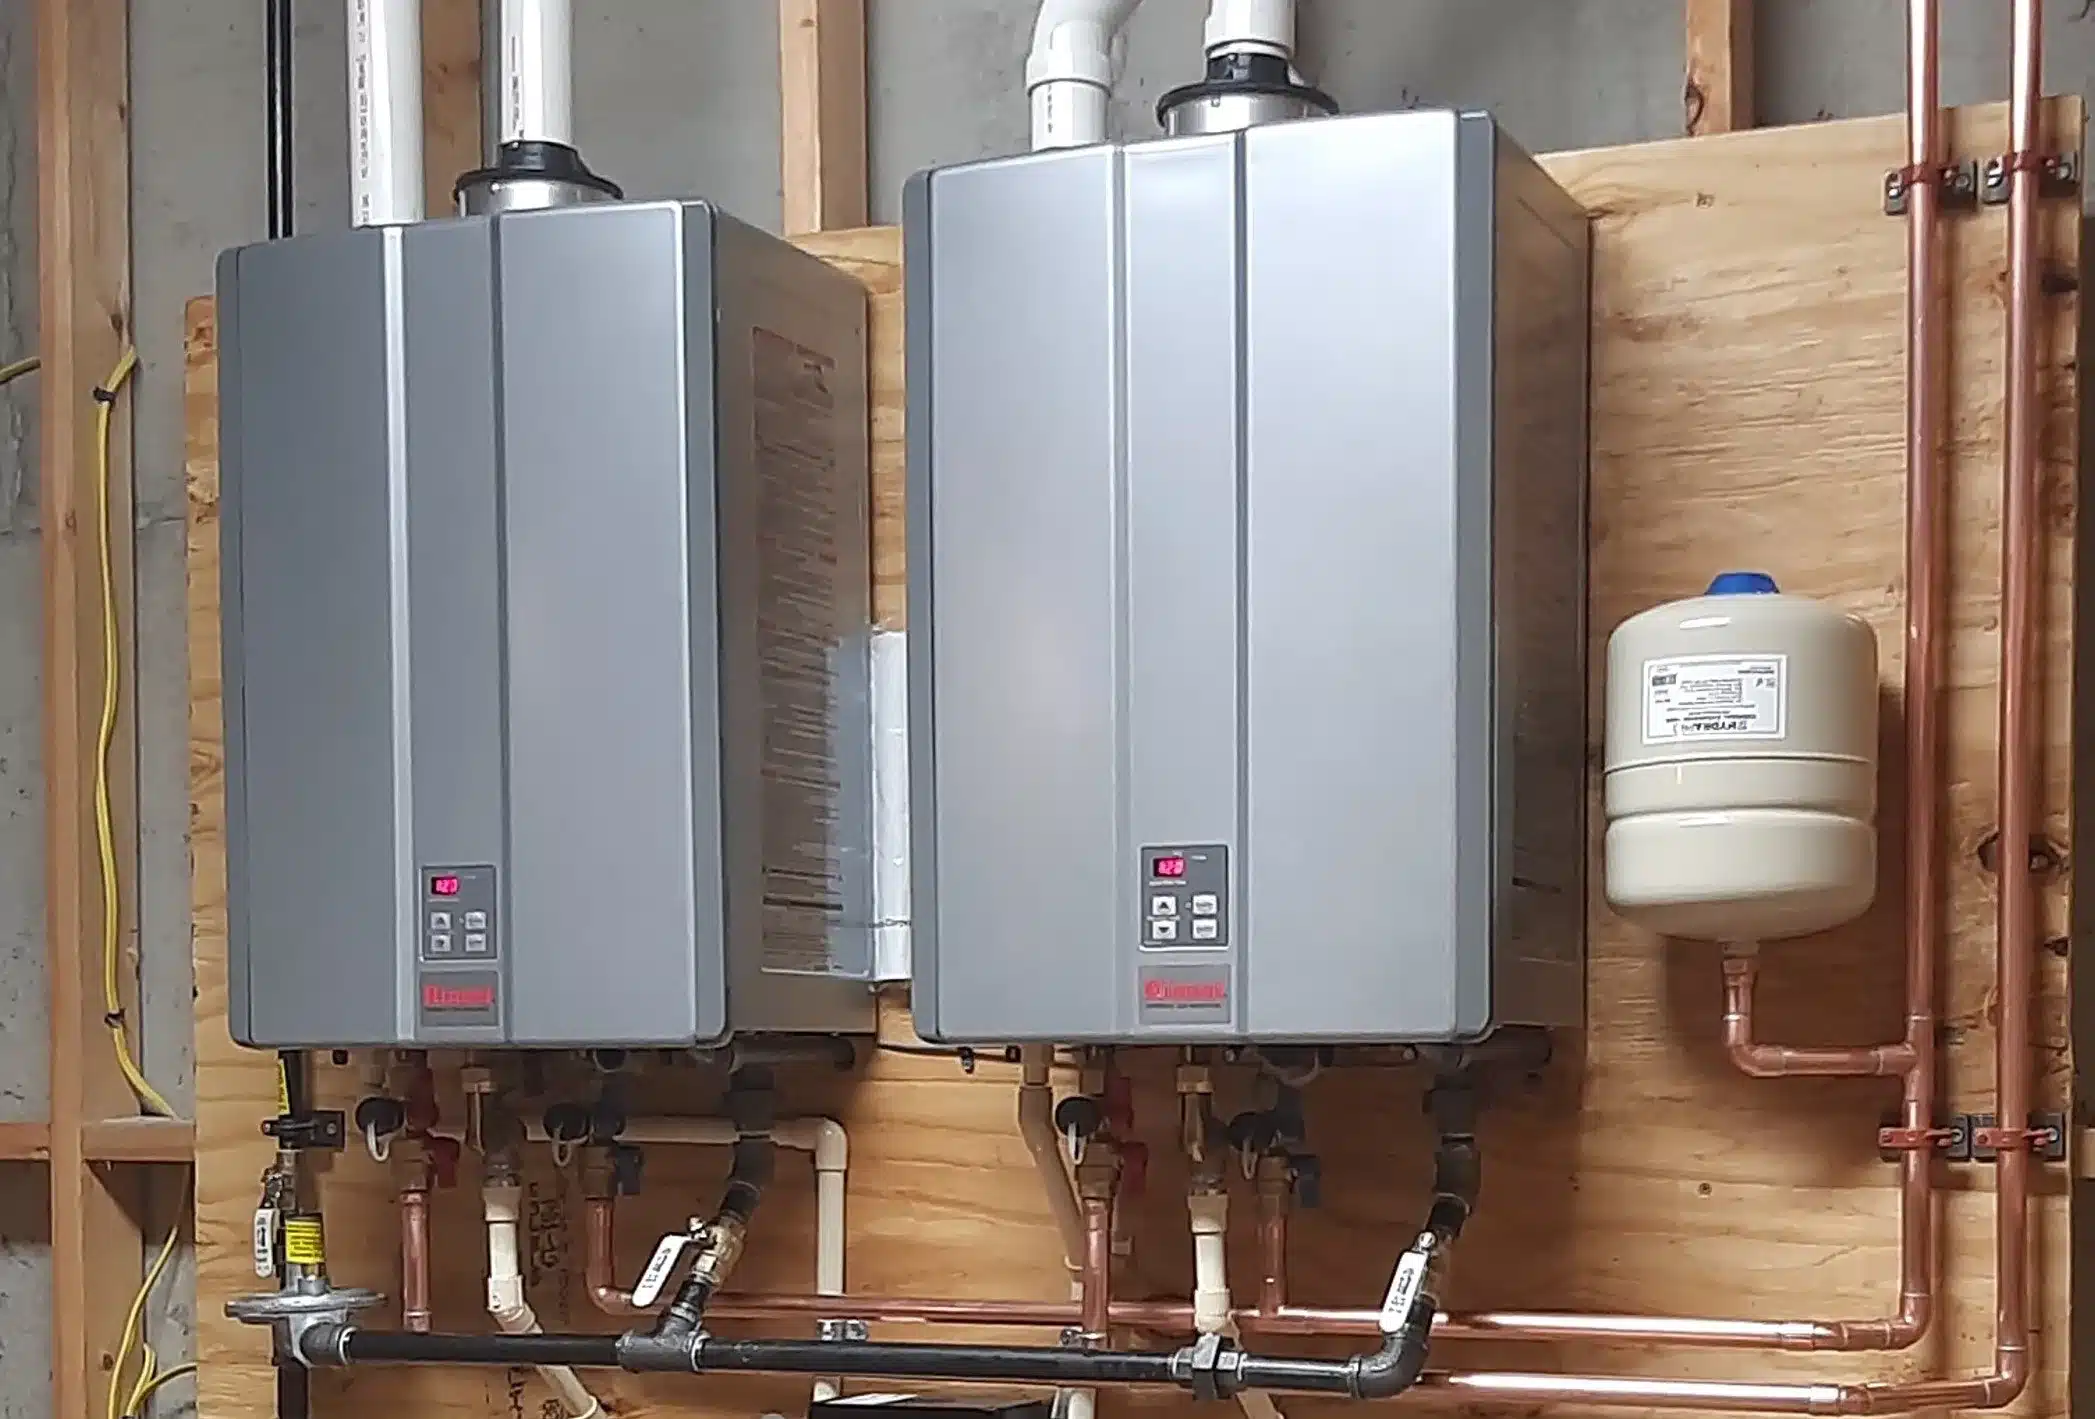 Tankless Water Heater Installed in the Basement